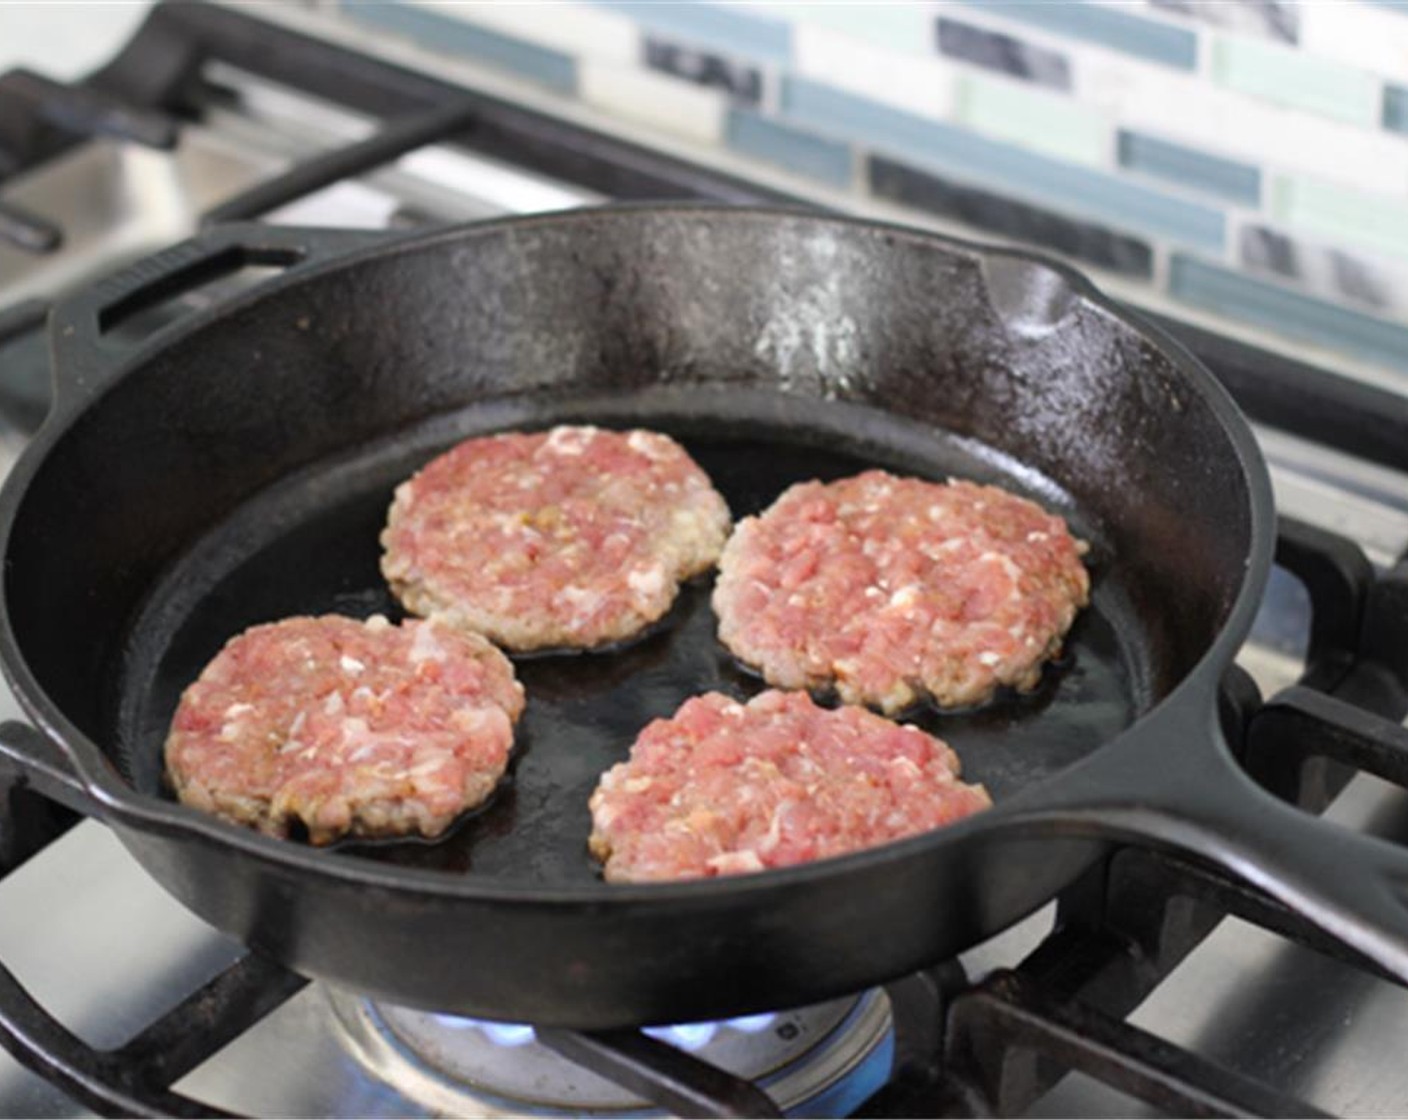 step 3 When cooking the sausage, heat up some Frying Oil (as needed) in a skillet, add the sausages and brown them on both sides on medium heat, about 5 minutes per side.